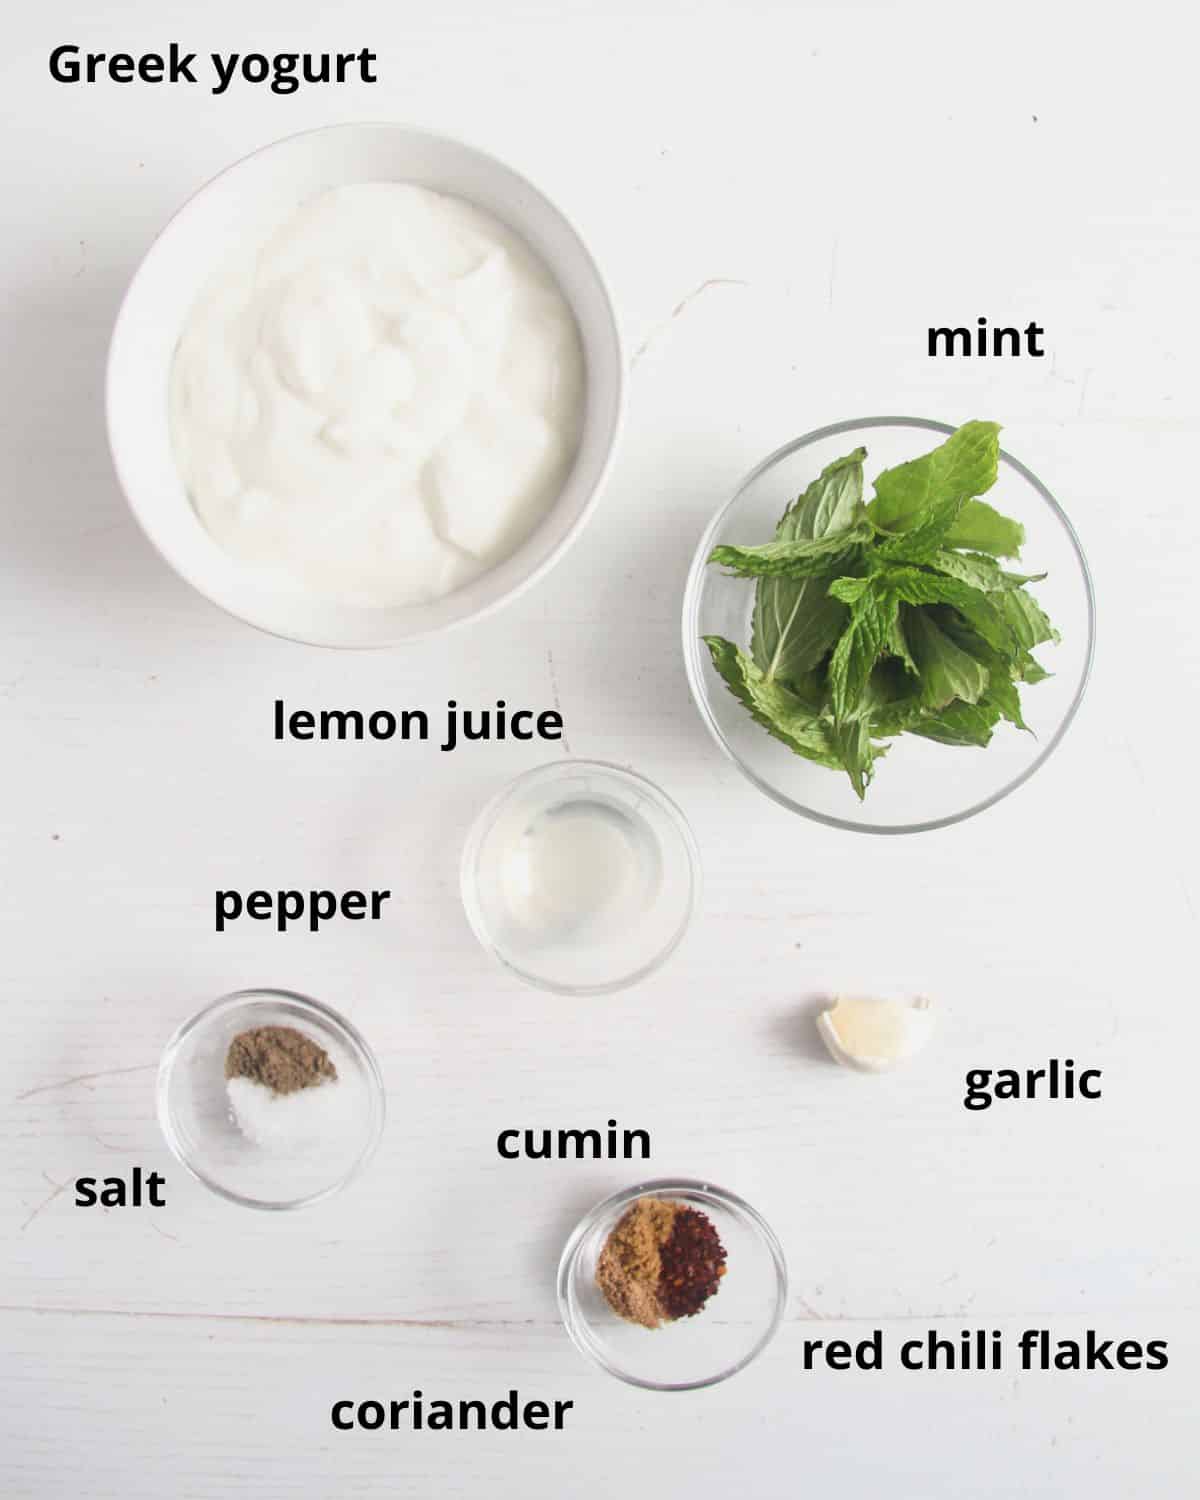 listed ingredients for making yogurt sauce on the table.